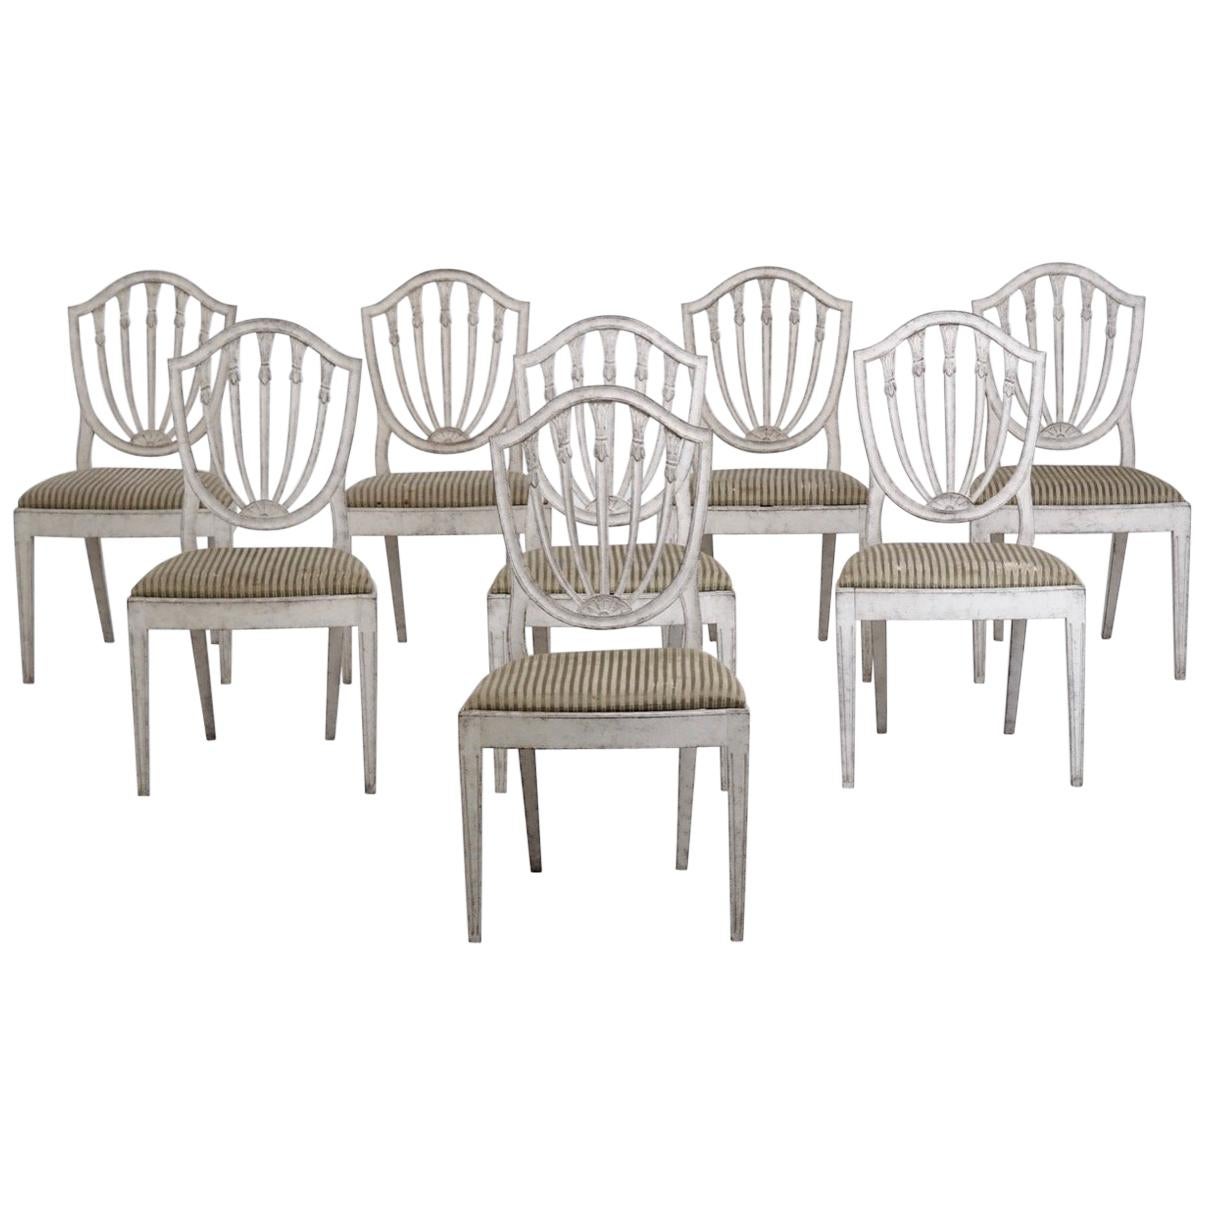 Set of 8 Chairs, Probably Danish, in the Style of C.J. Lillie, 19th Century